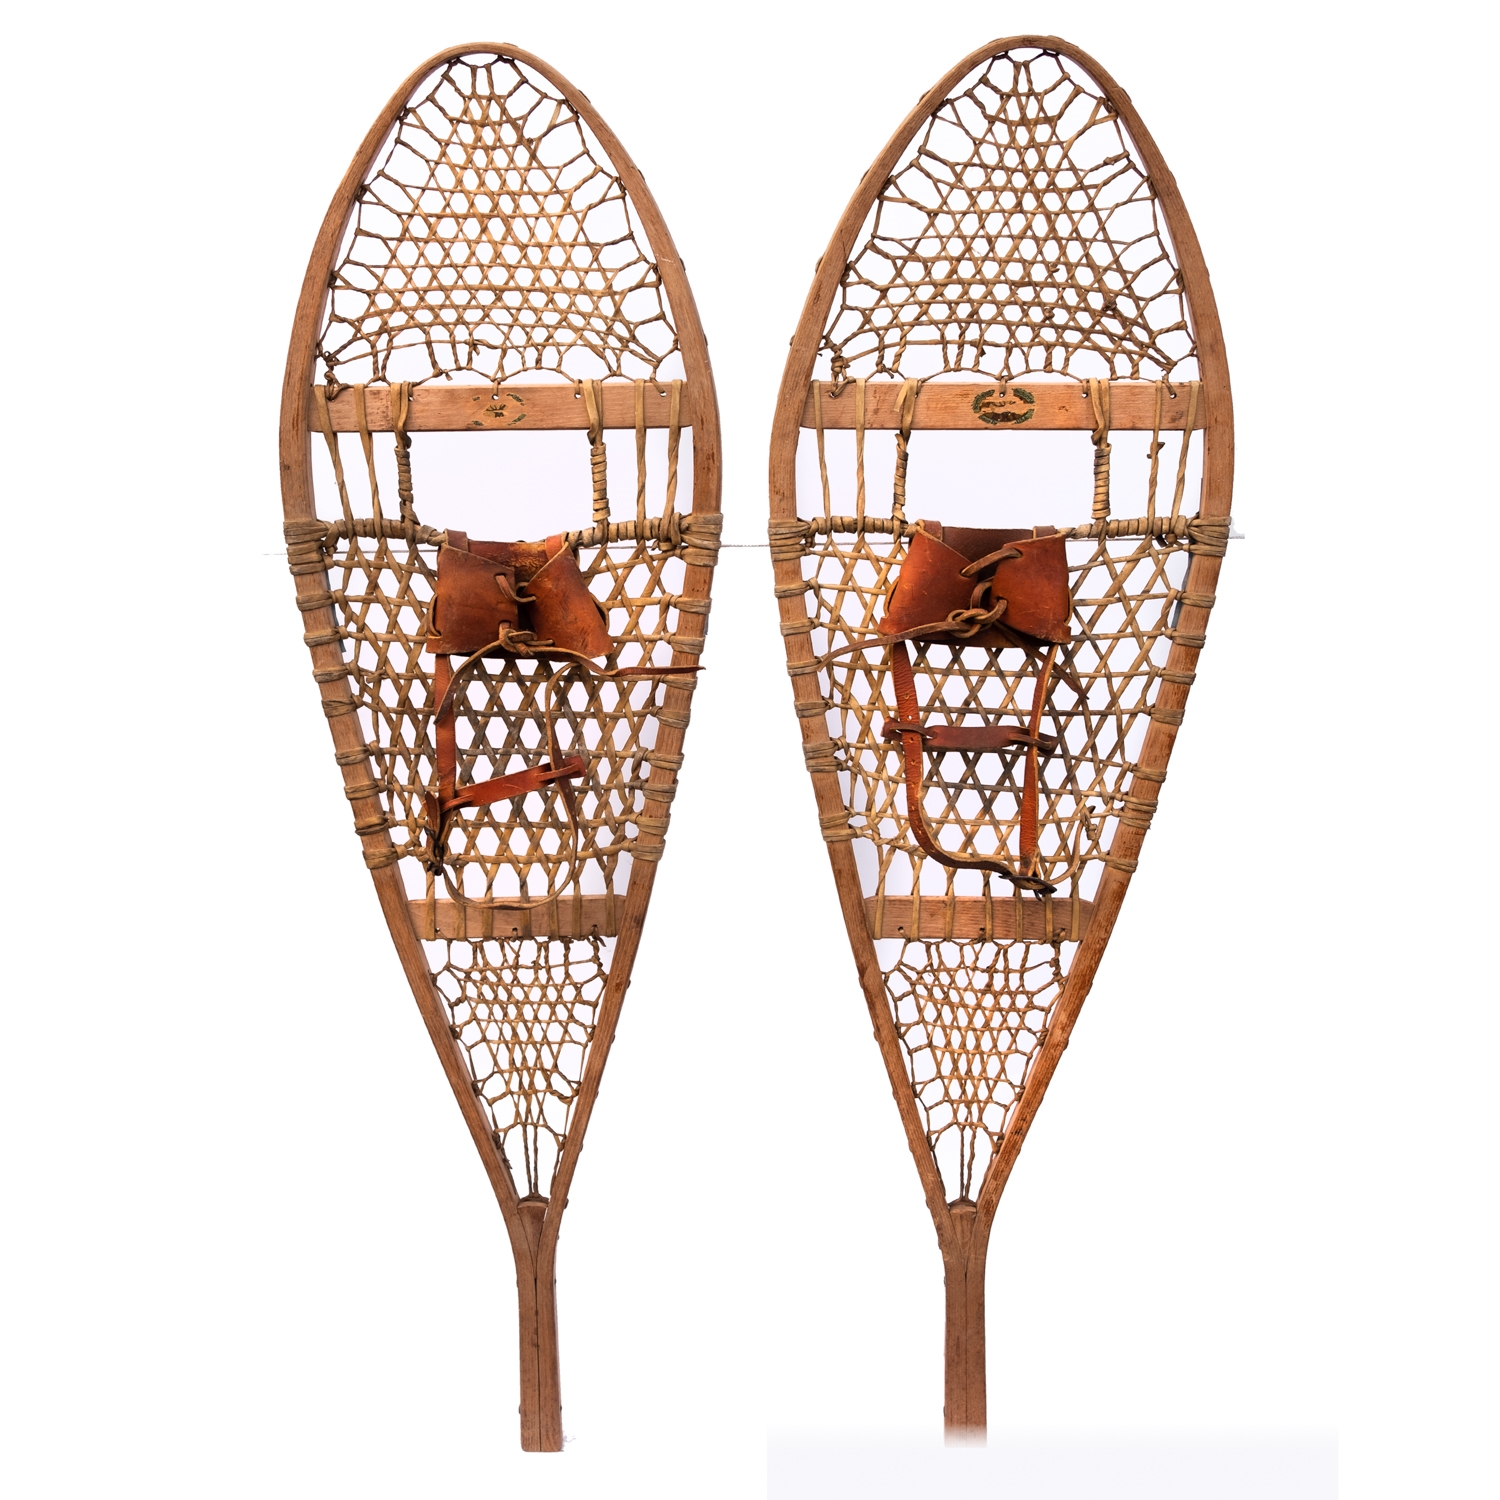 1940s Northland Maine Style Vintage Snowshoes with leather bindings. Size -  39 x 16 inches